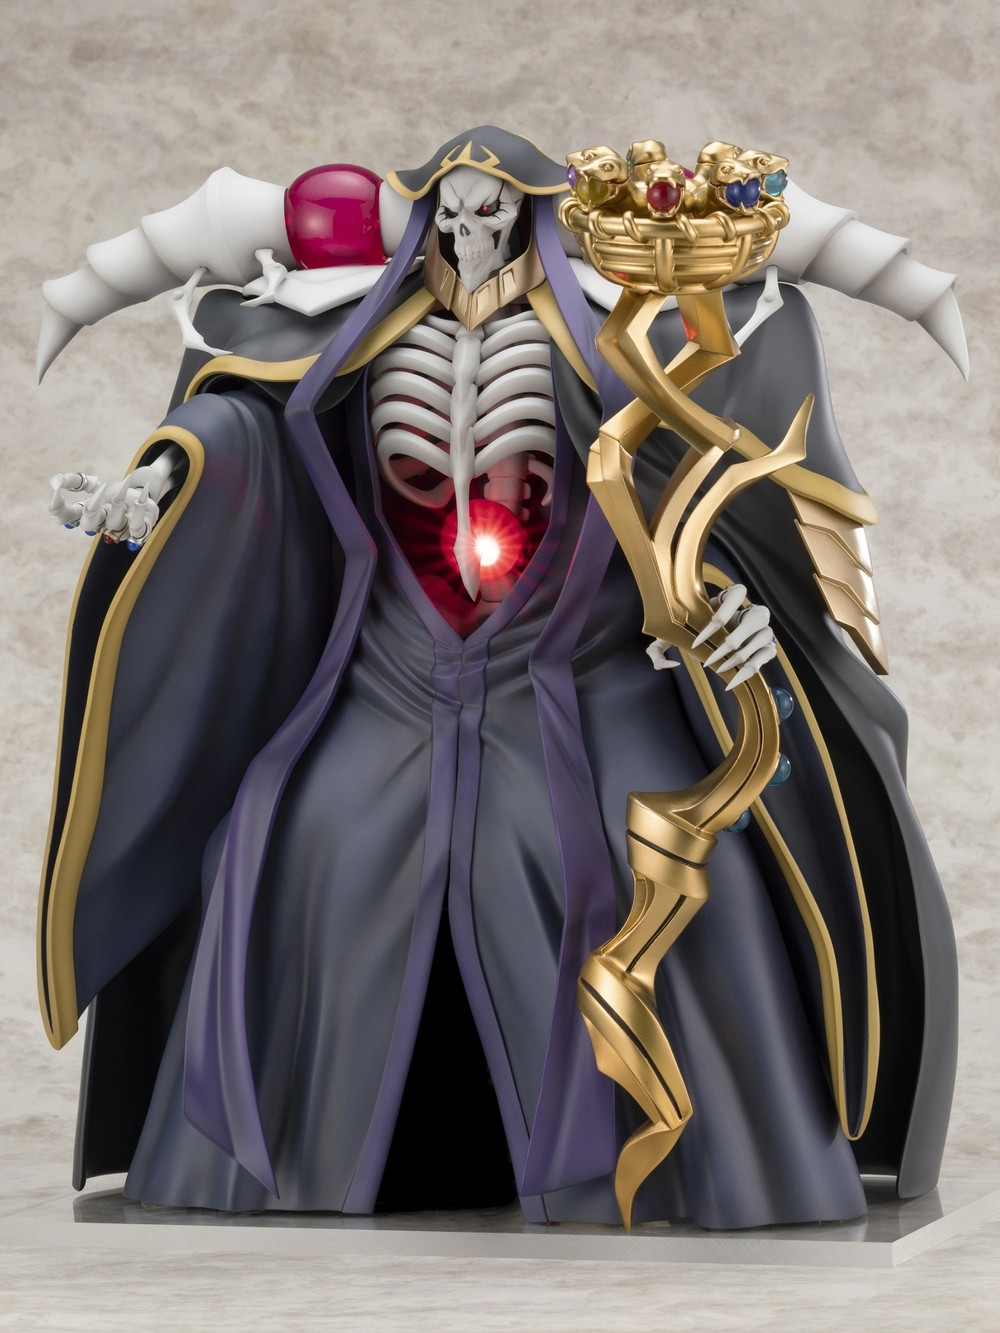 Novel Overlord #14 Limited Edition with Figure | HLJ.com